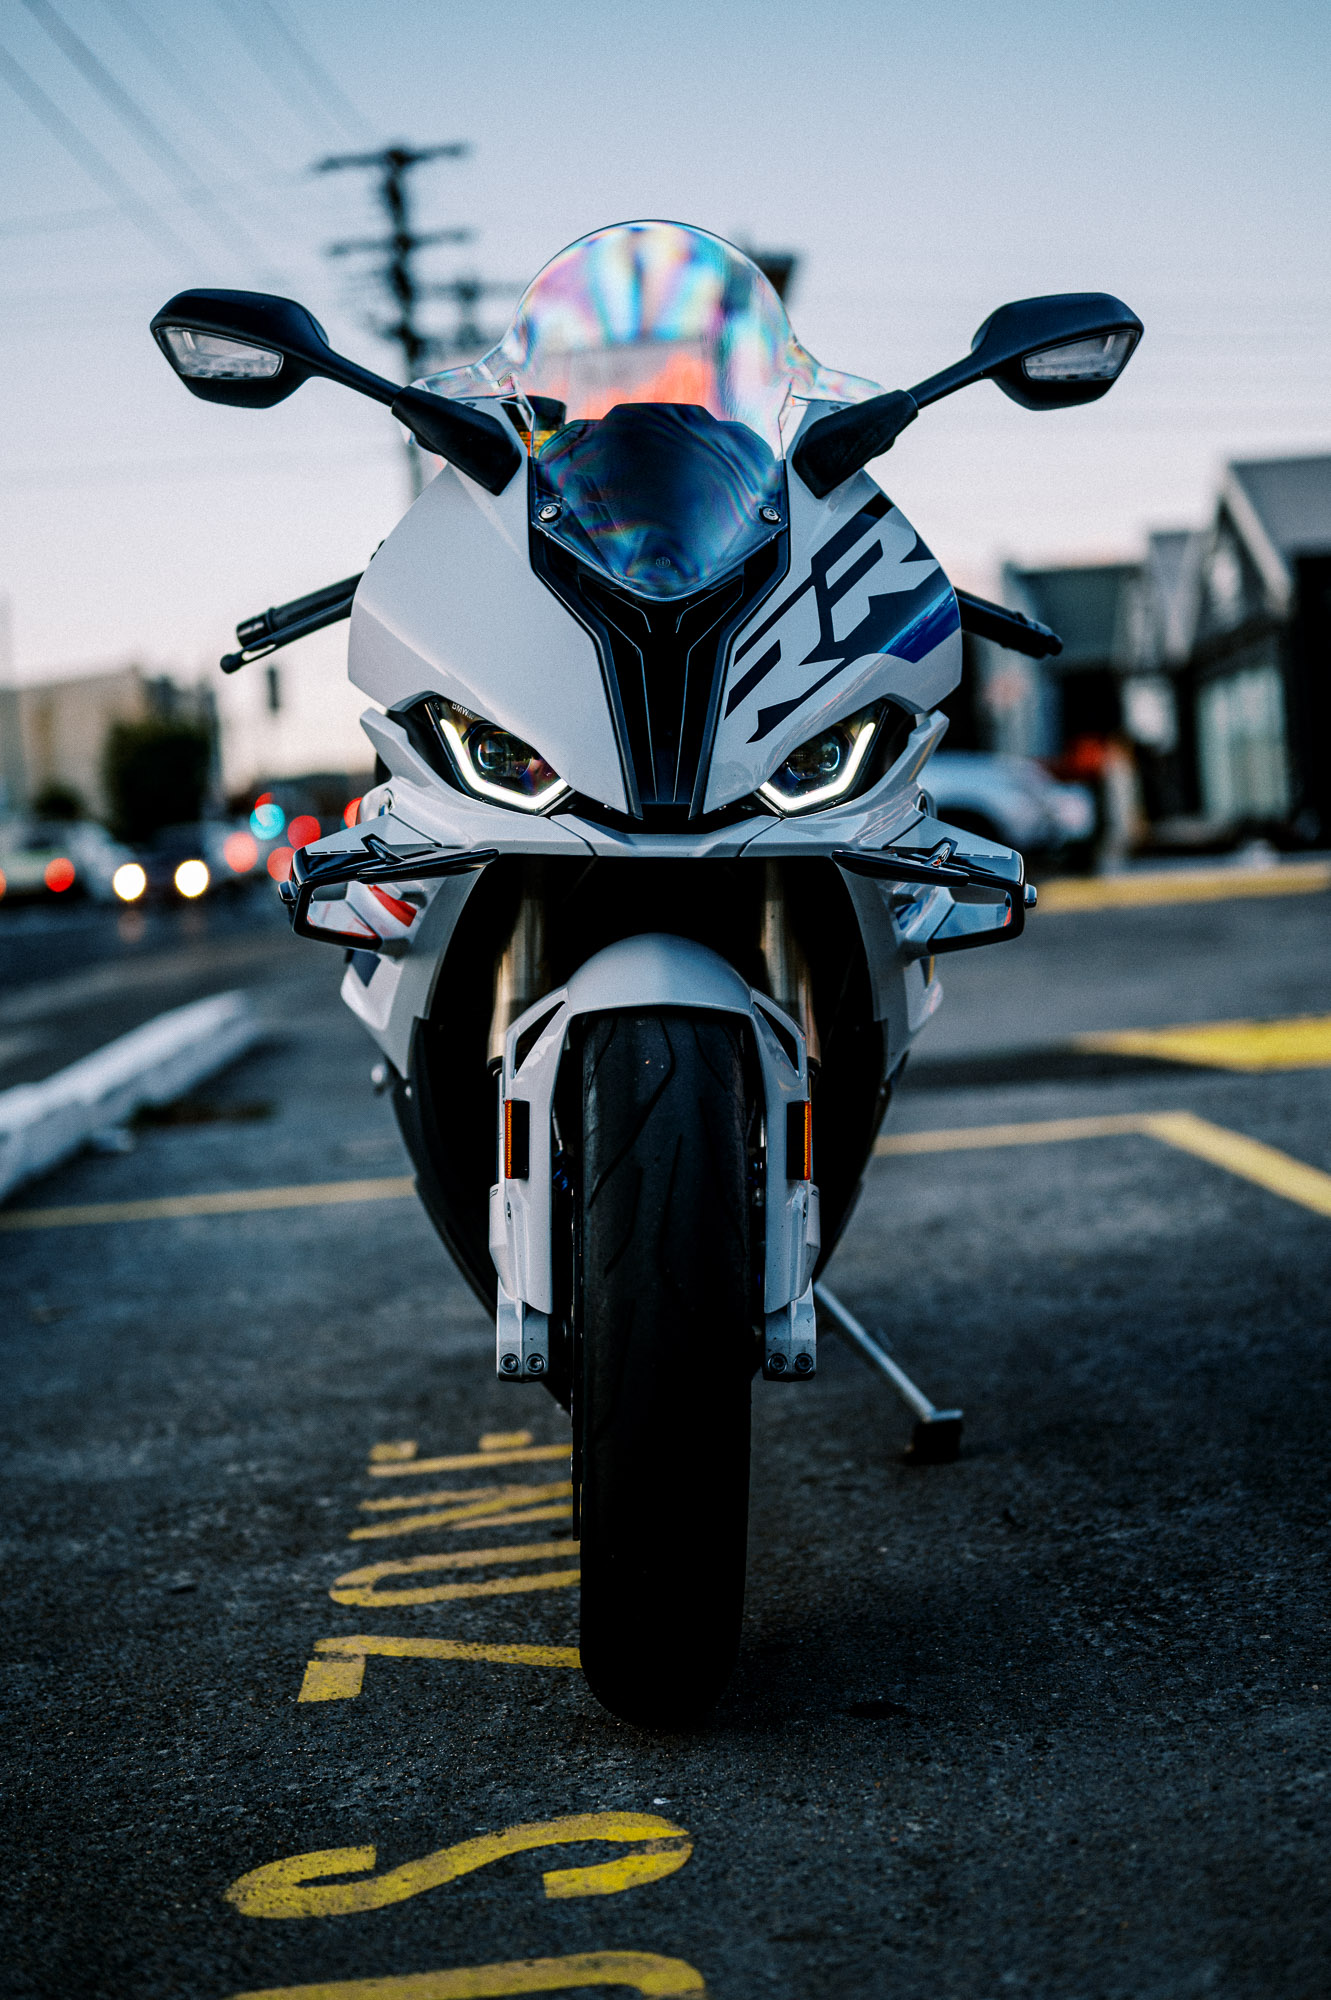 A 2023 BMW S 1000 RR motorcycle parked outside at dusk in Sydney